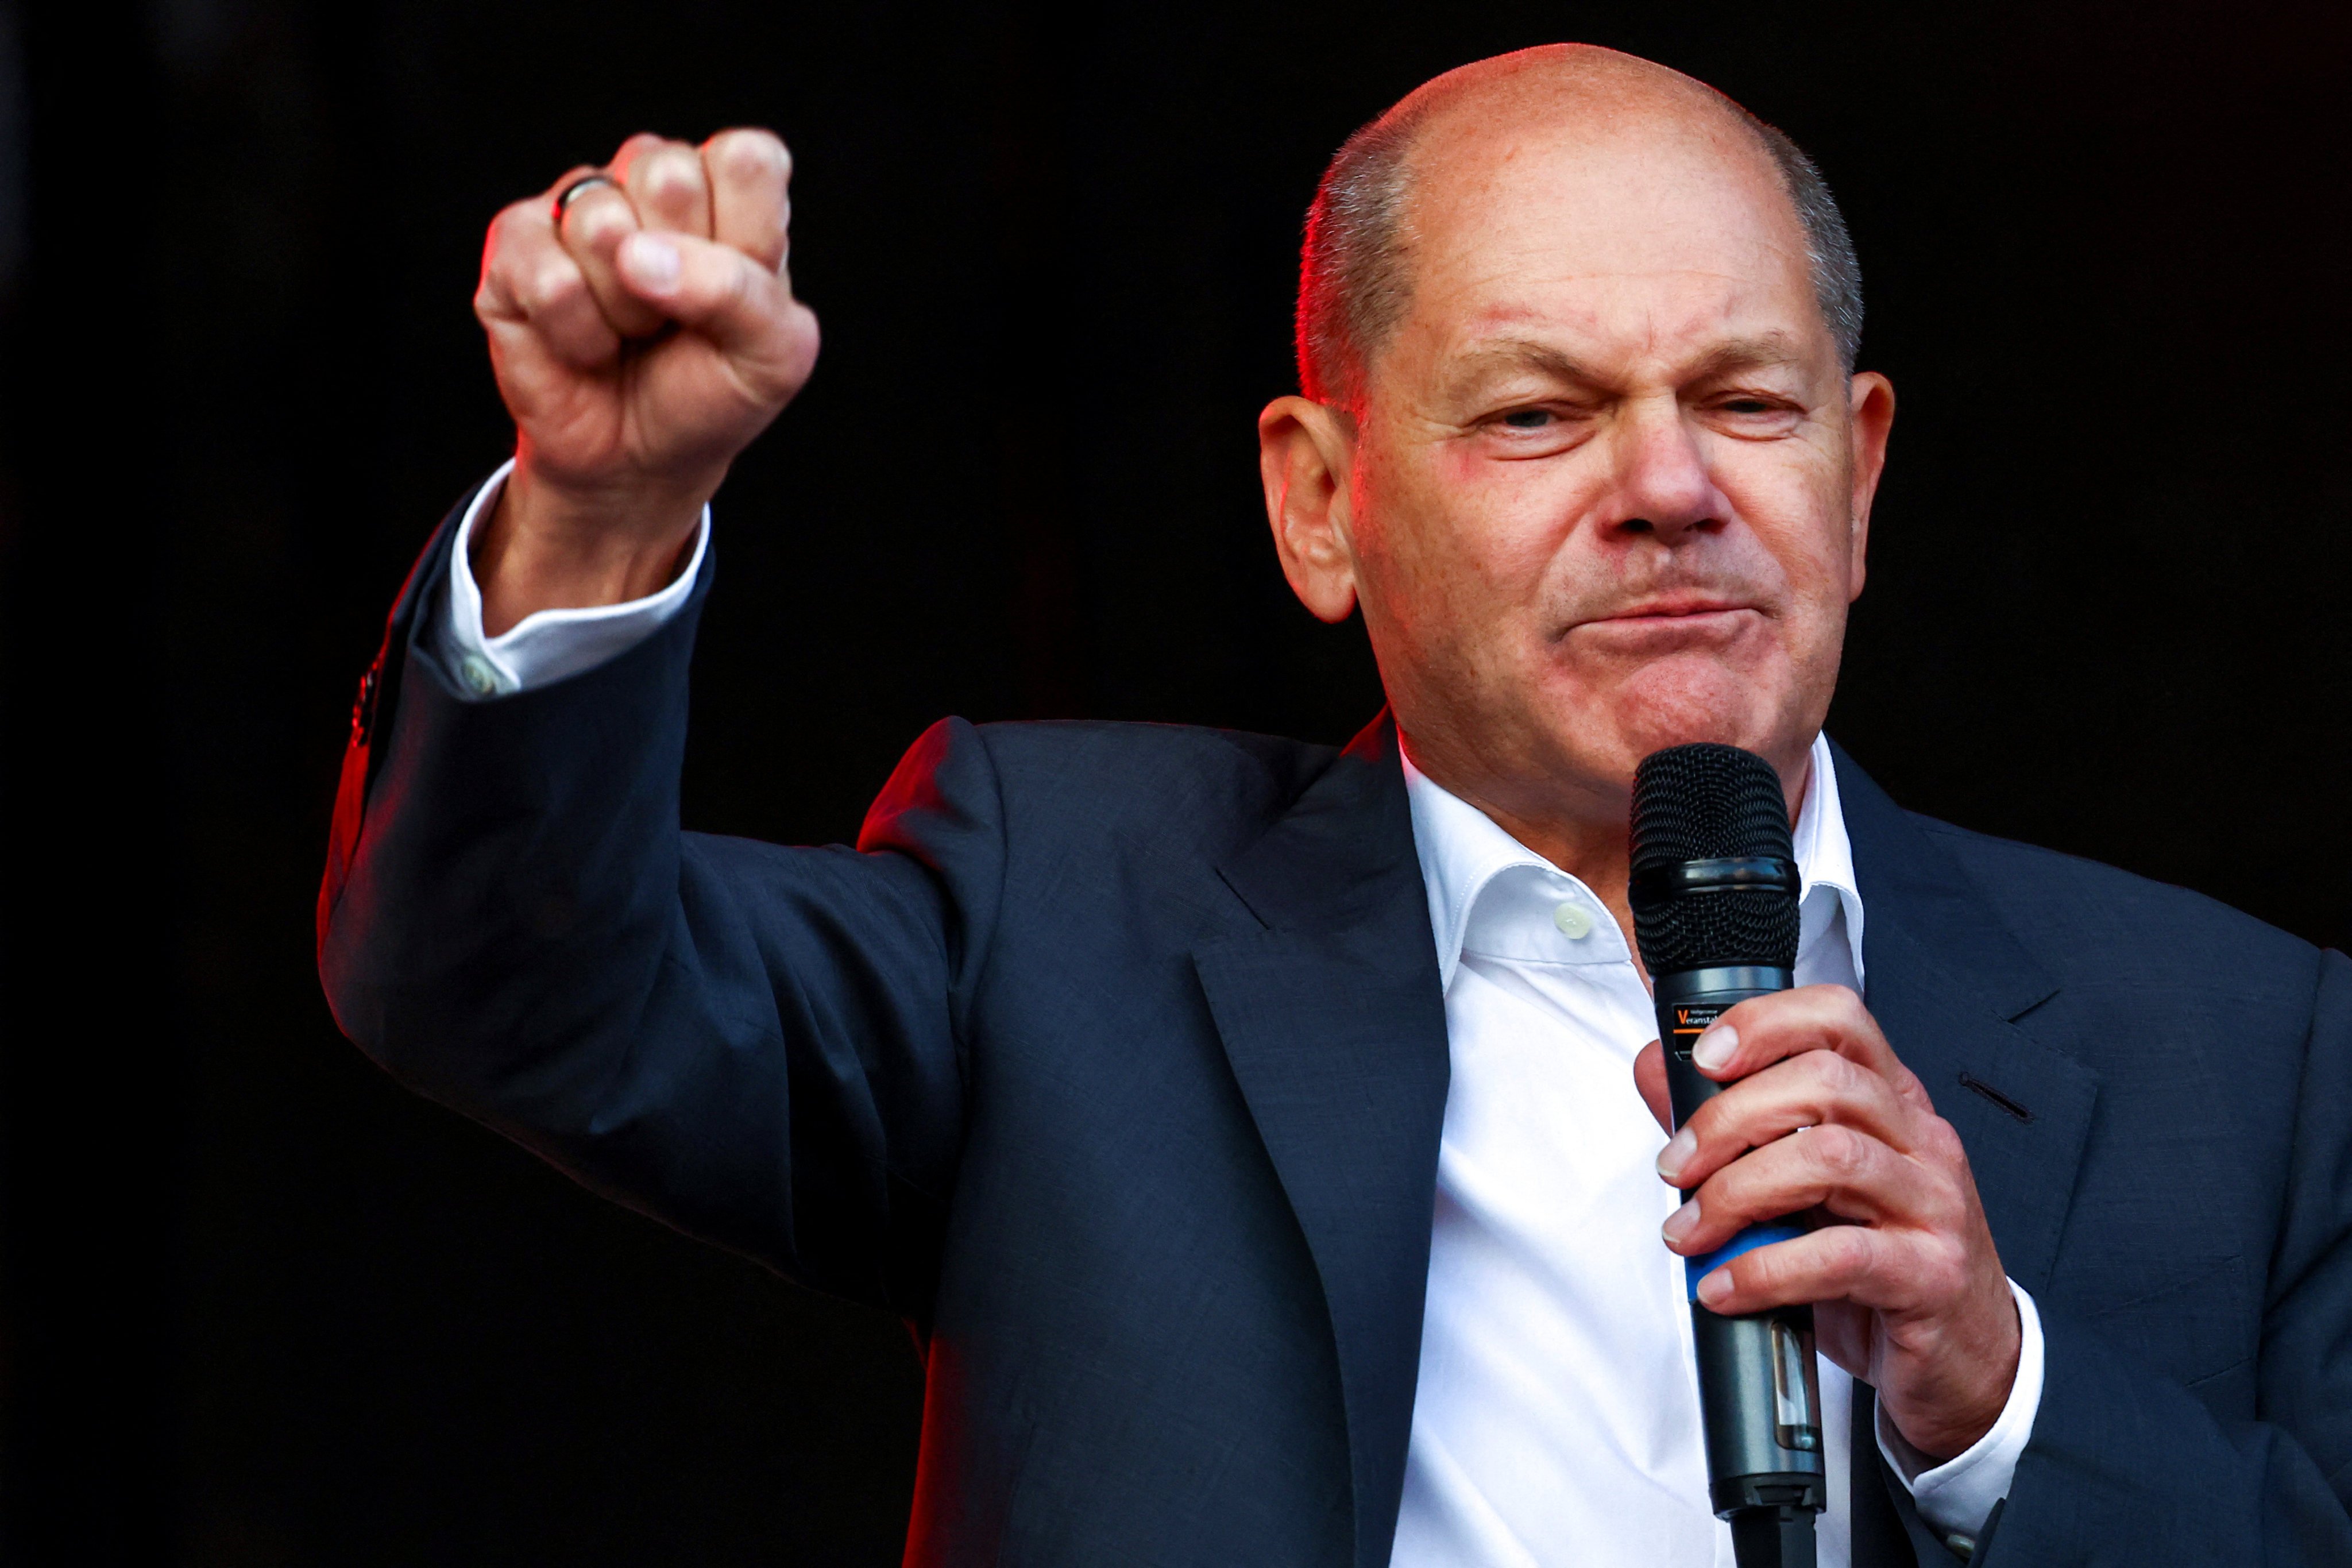 German Chancellor Olaf Scholz speaks at an election campaign rally in Baunatal, Germany on Saturday. Photo: Reuters